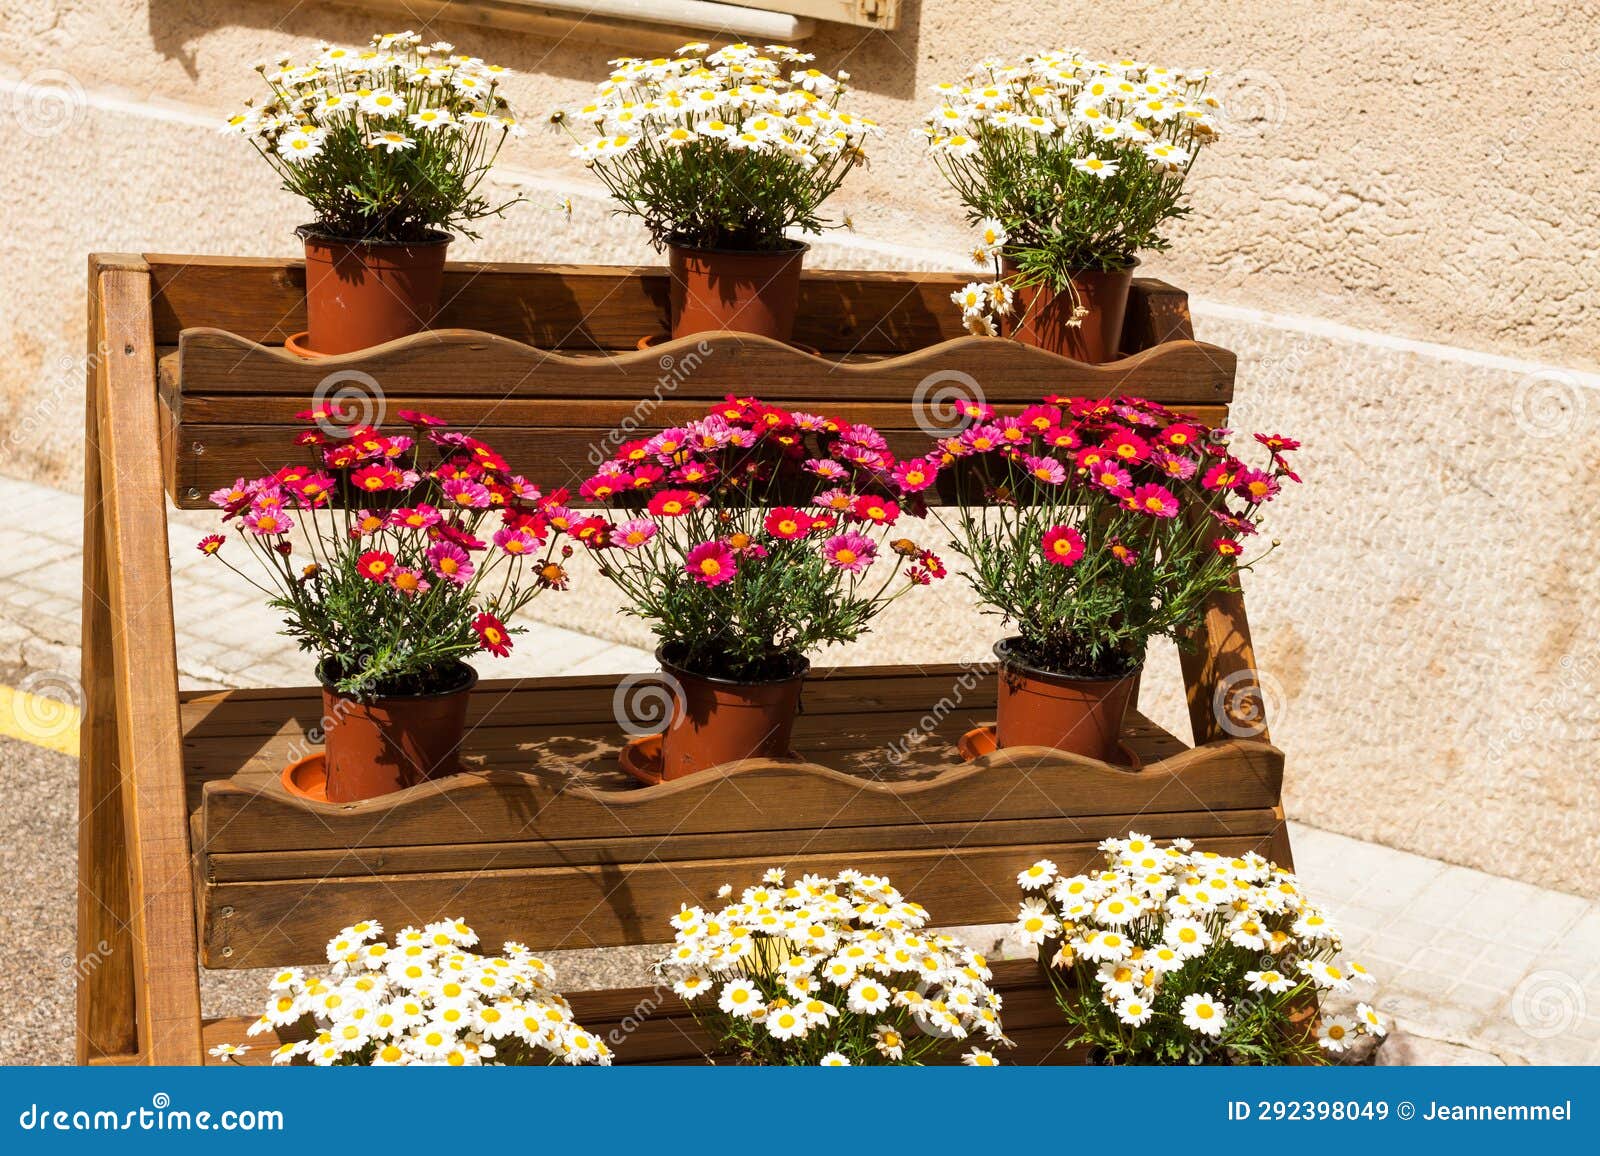 wooden support with flower pots of pink and white chrysanthemums on 